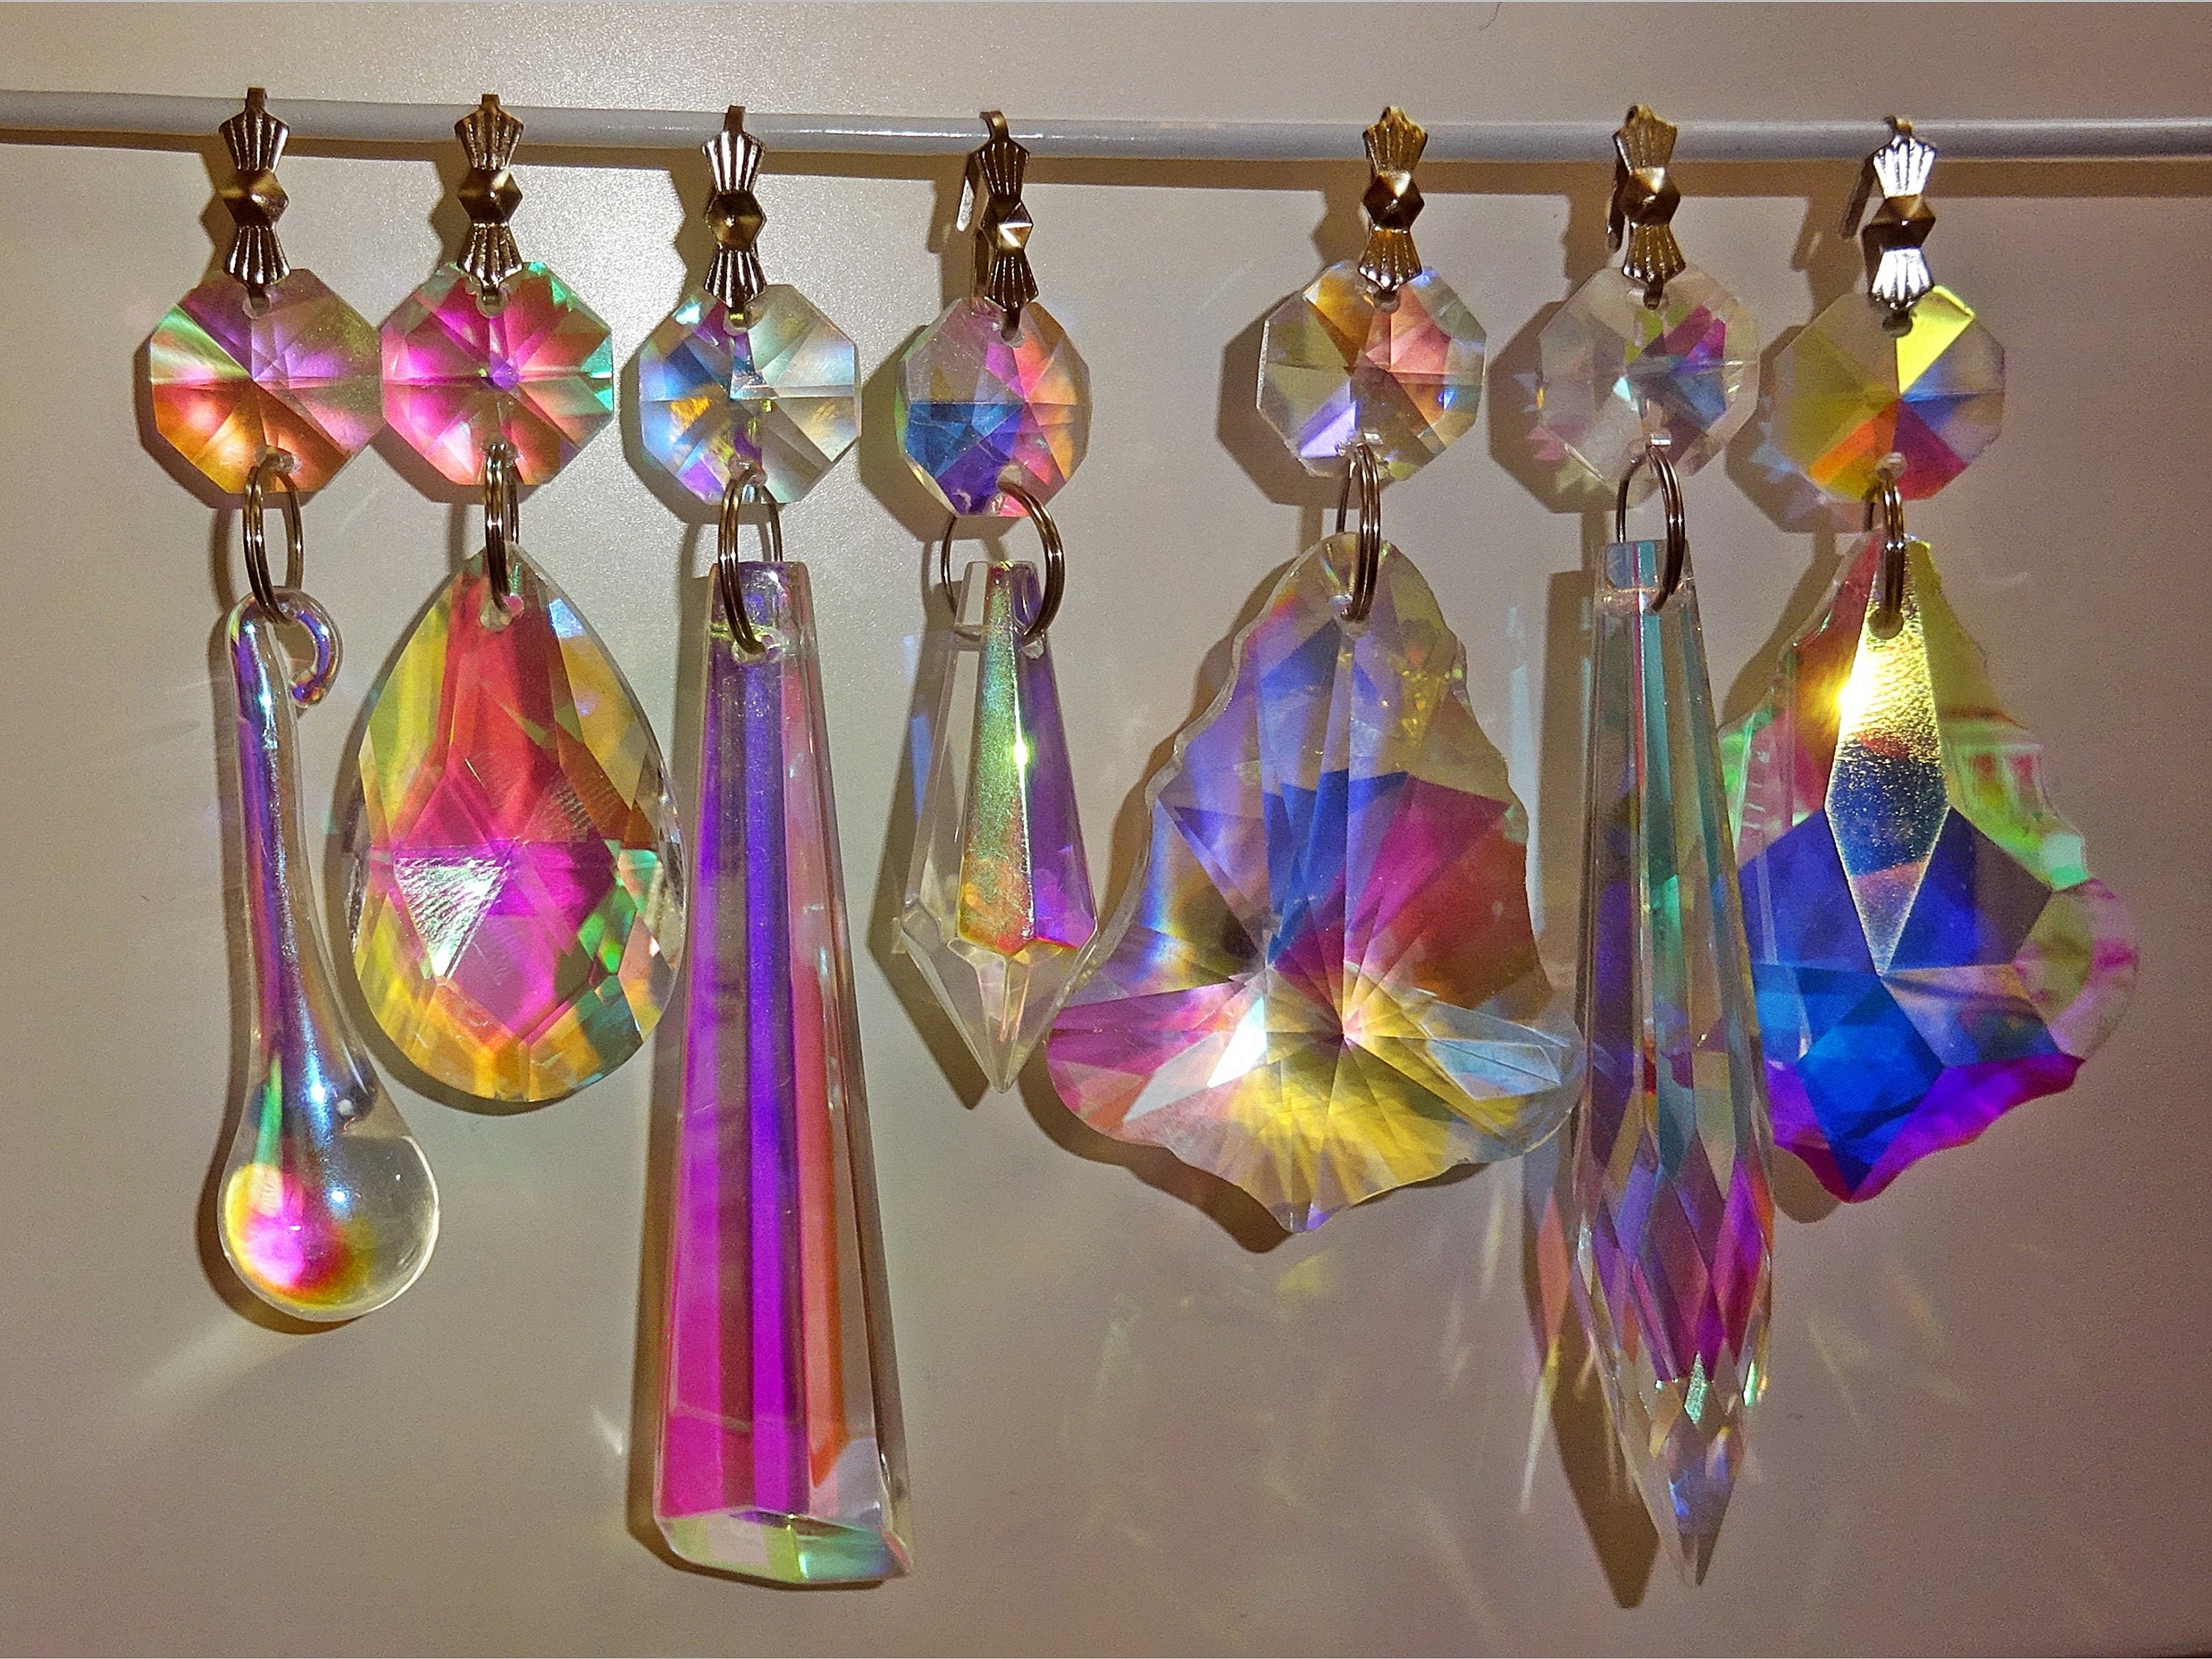 5 AB Iridescent 63mm French Chandelier Crystals Prisms Lead Crystal Ornaments 